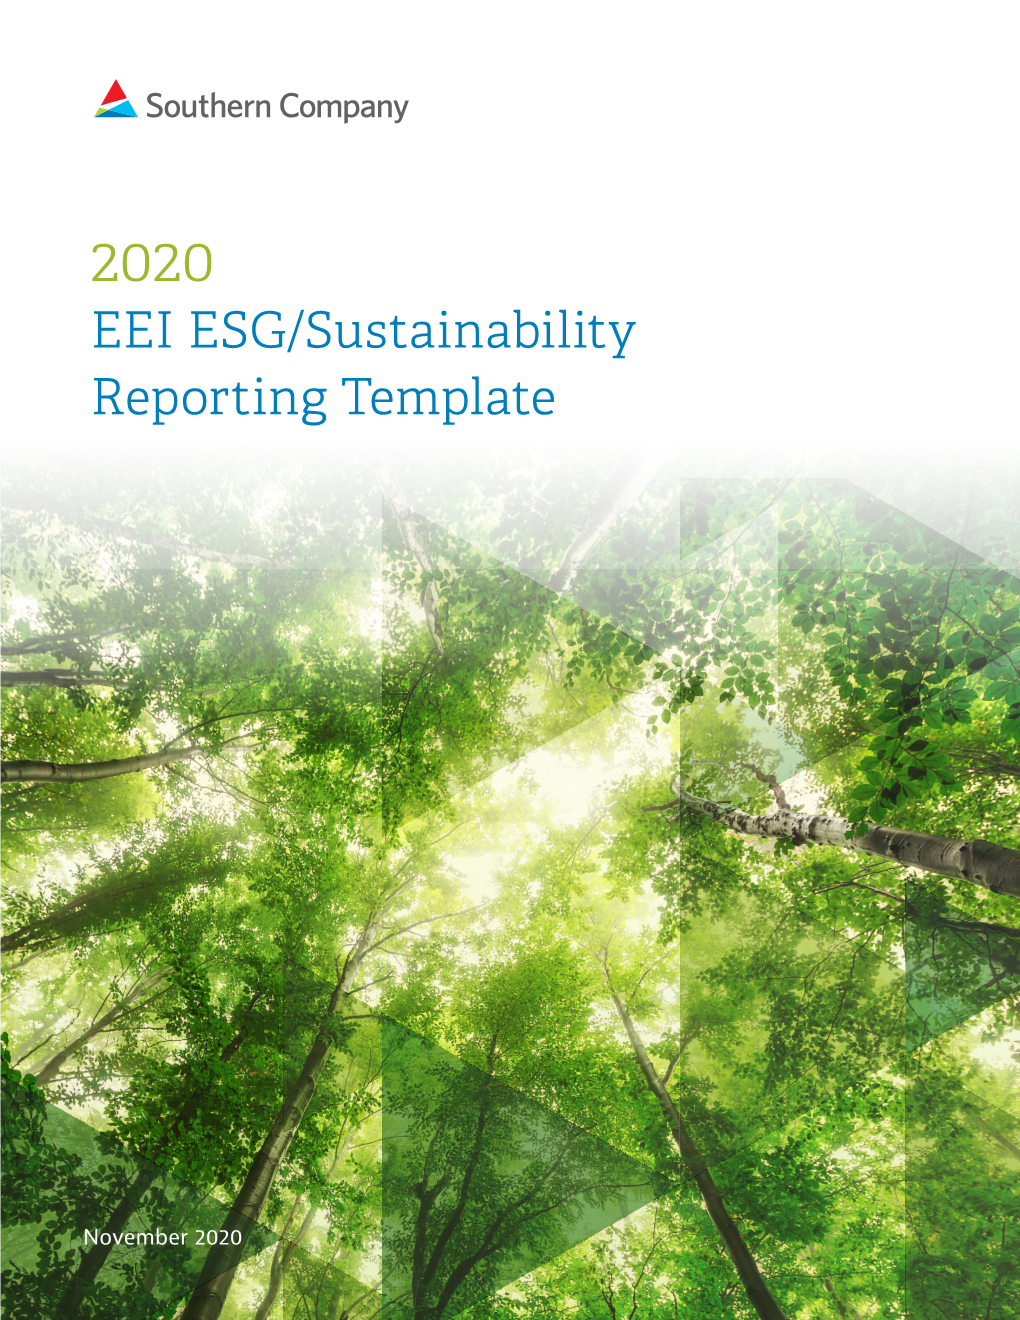 2020 EEI ESG/Sustainability Reporting Template